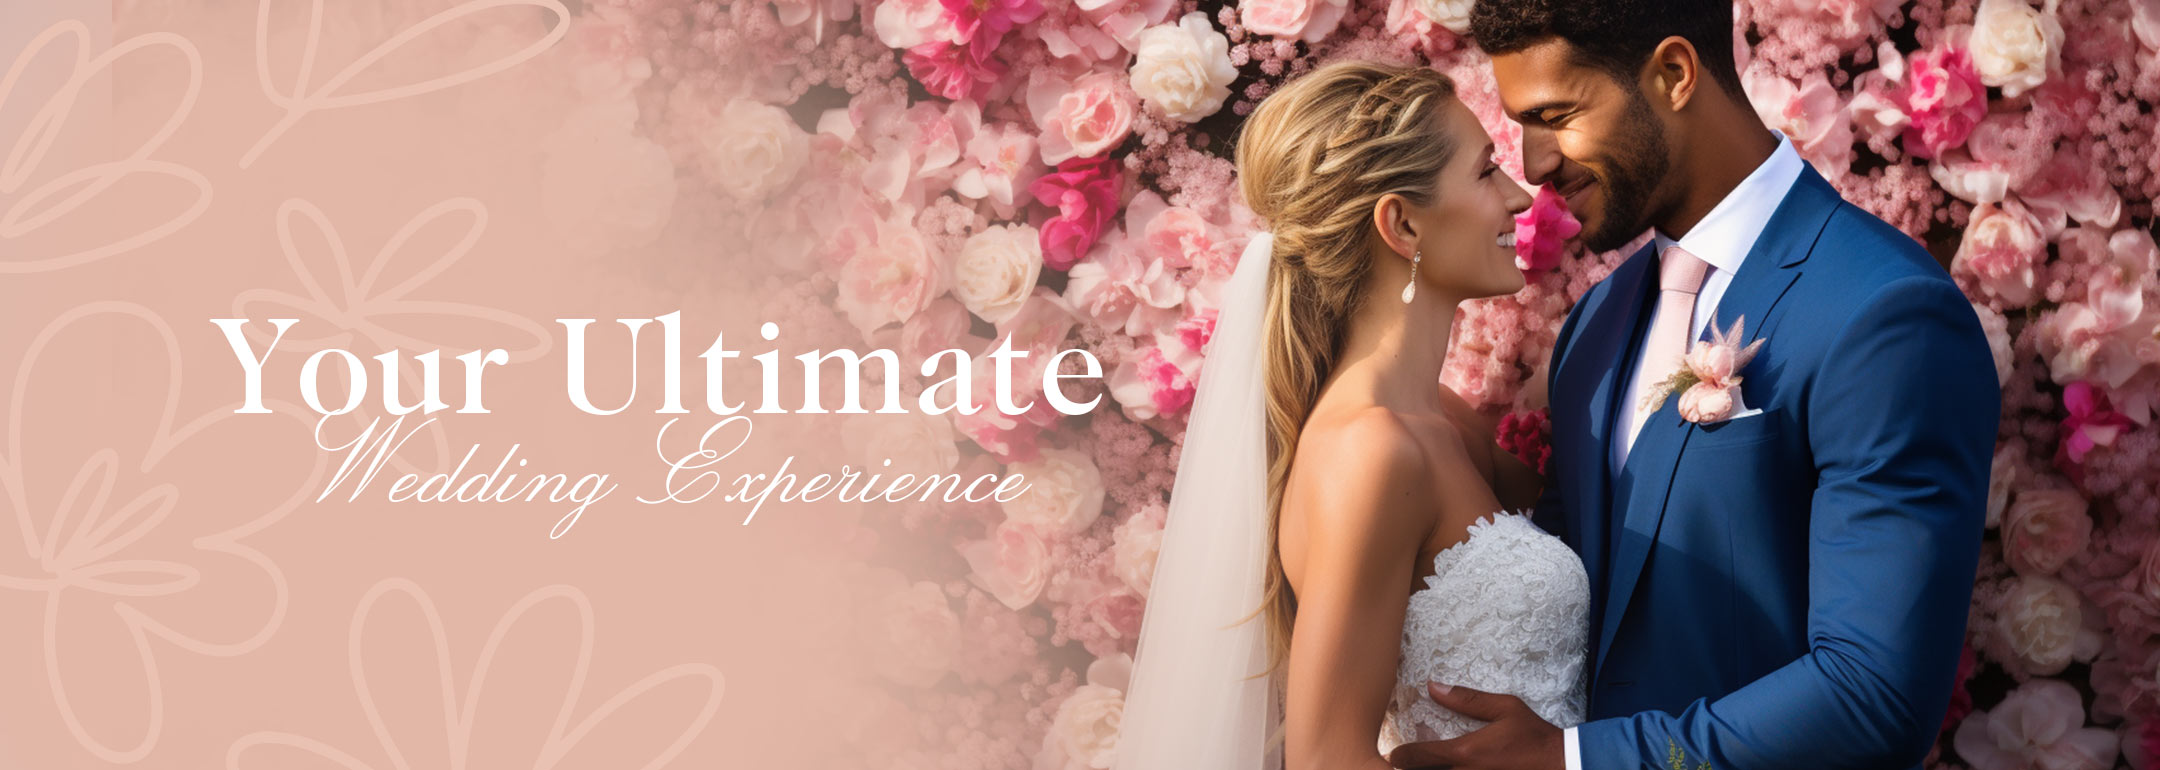 A bride and groom smiling at each other, surrounded by pink and white flowers, with the text 'Your Ultimate Wedding Experience' overlayed. Weddings at Fabulous Flowers and Gifts.